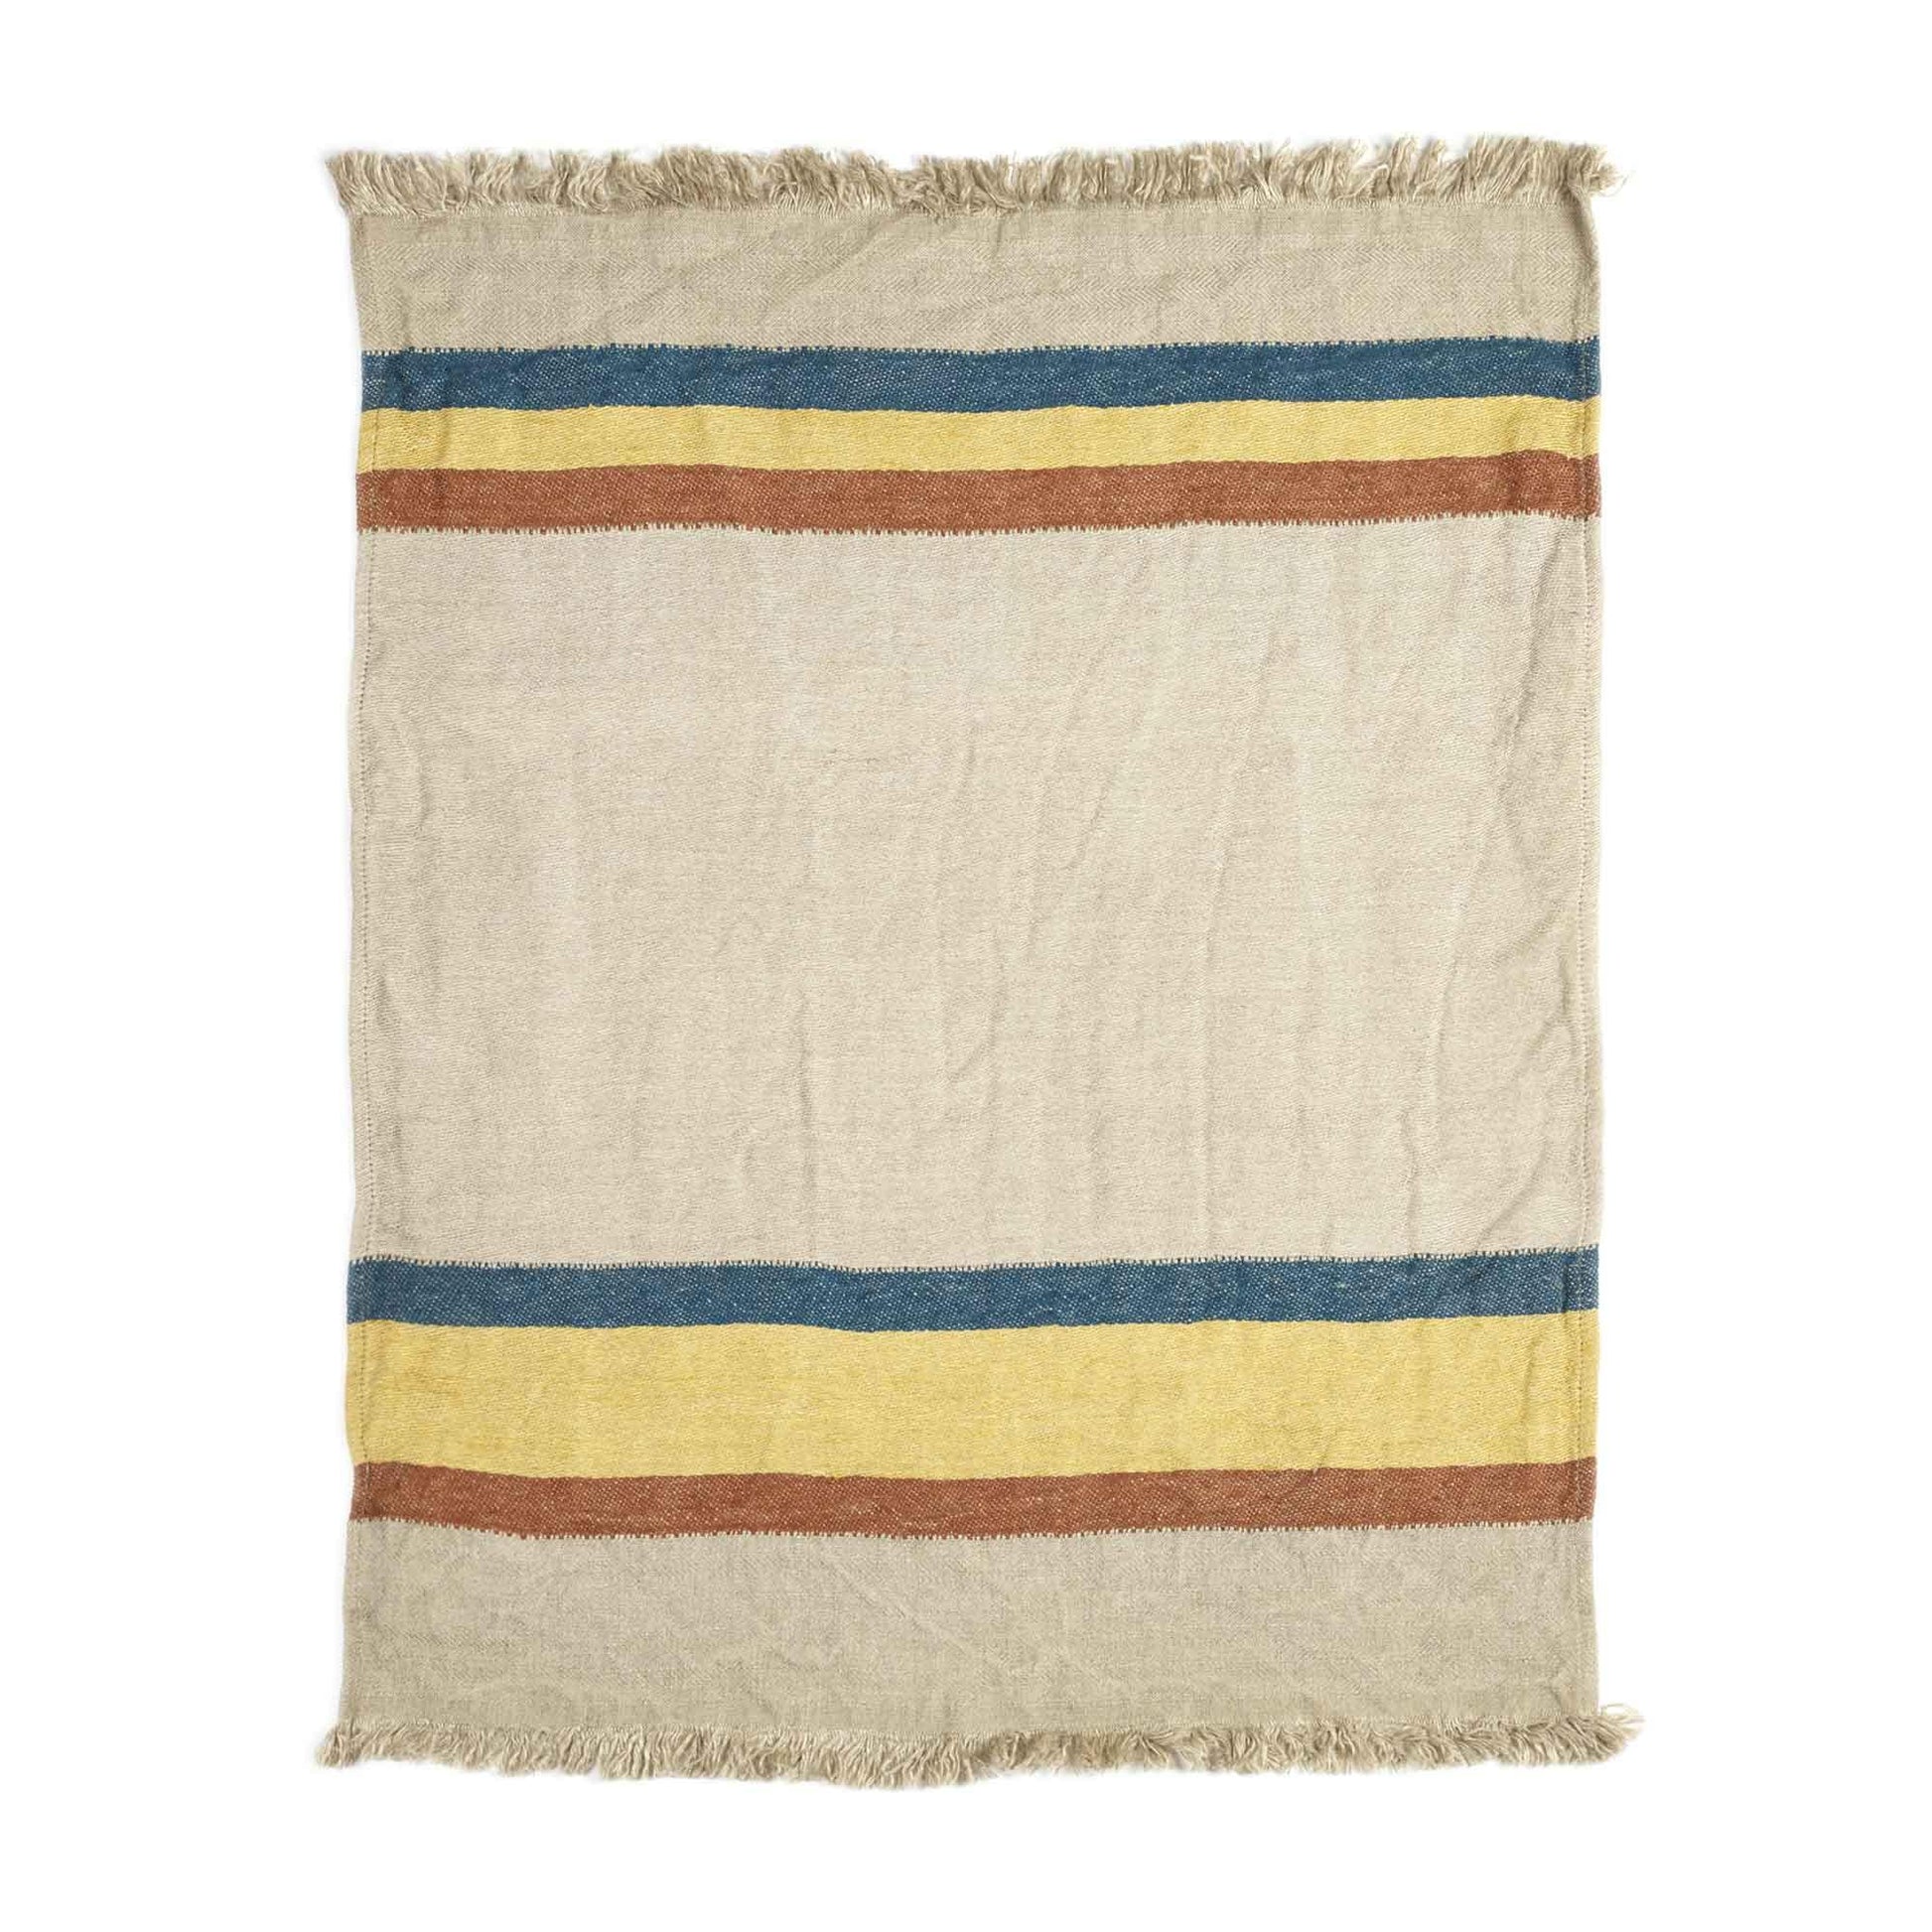 Belgian linen fouta throw blanket flat lay product shot in color Mercurio by Libeco for South Hous.